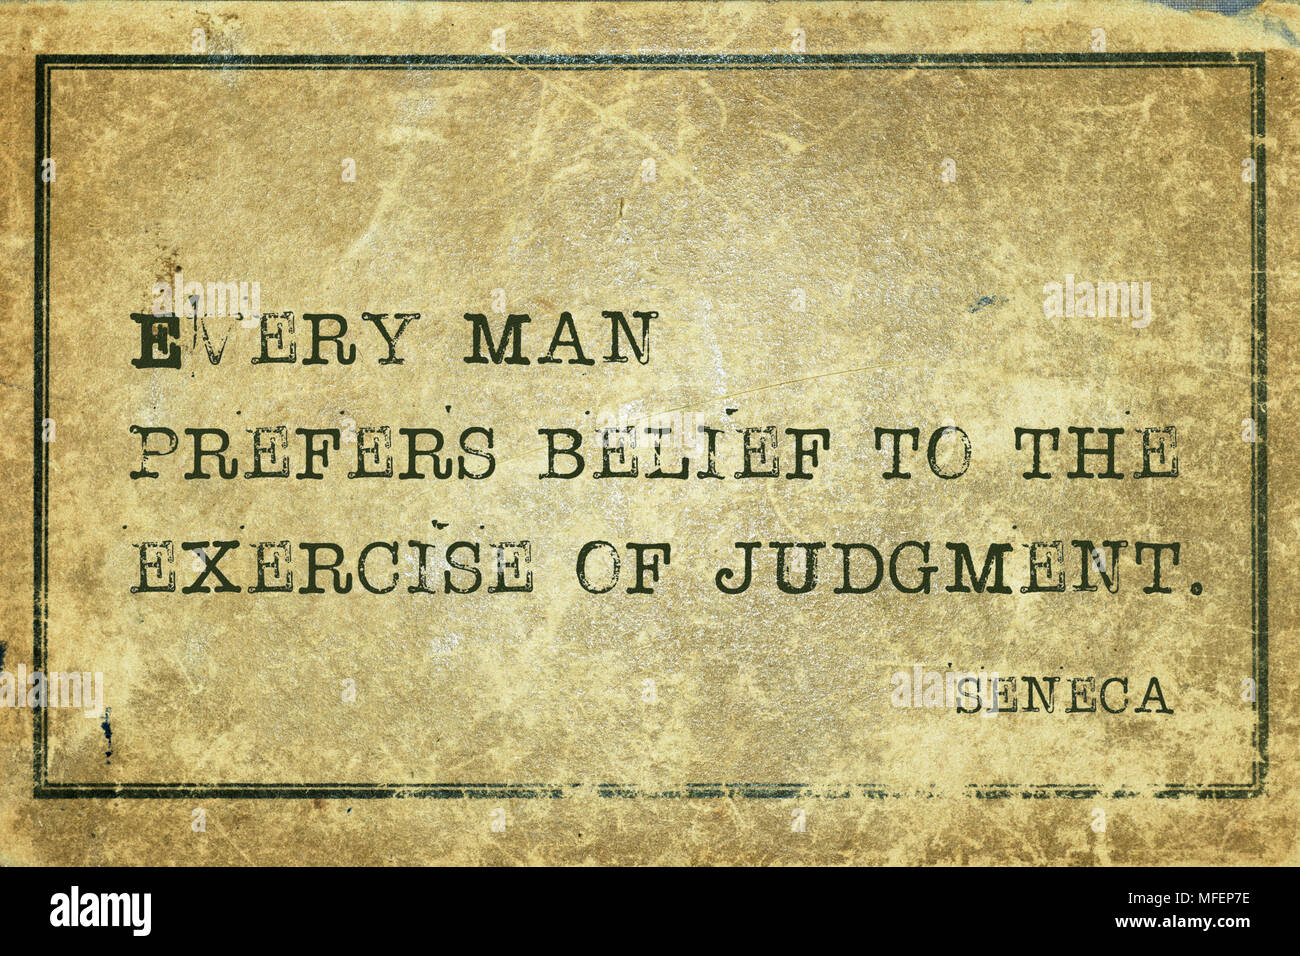 Every man prefers belief to the exercise of judgment - ancient Roman philosopher Seneca quote printed on grunge vintage cardboard Stock Photo